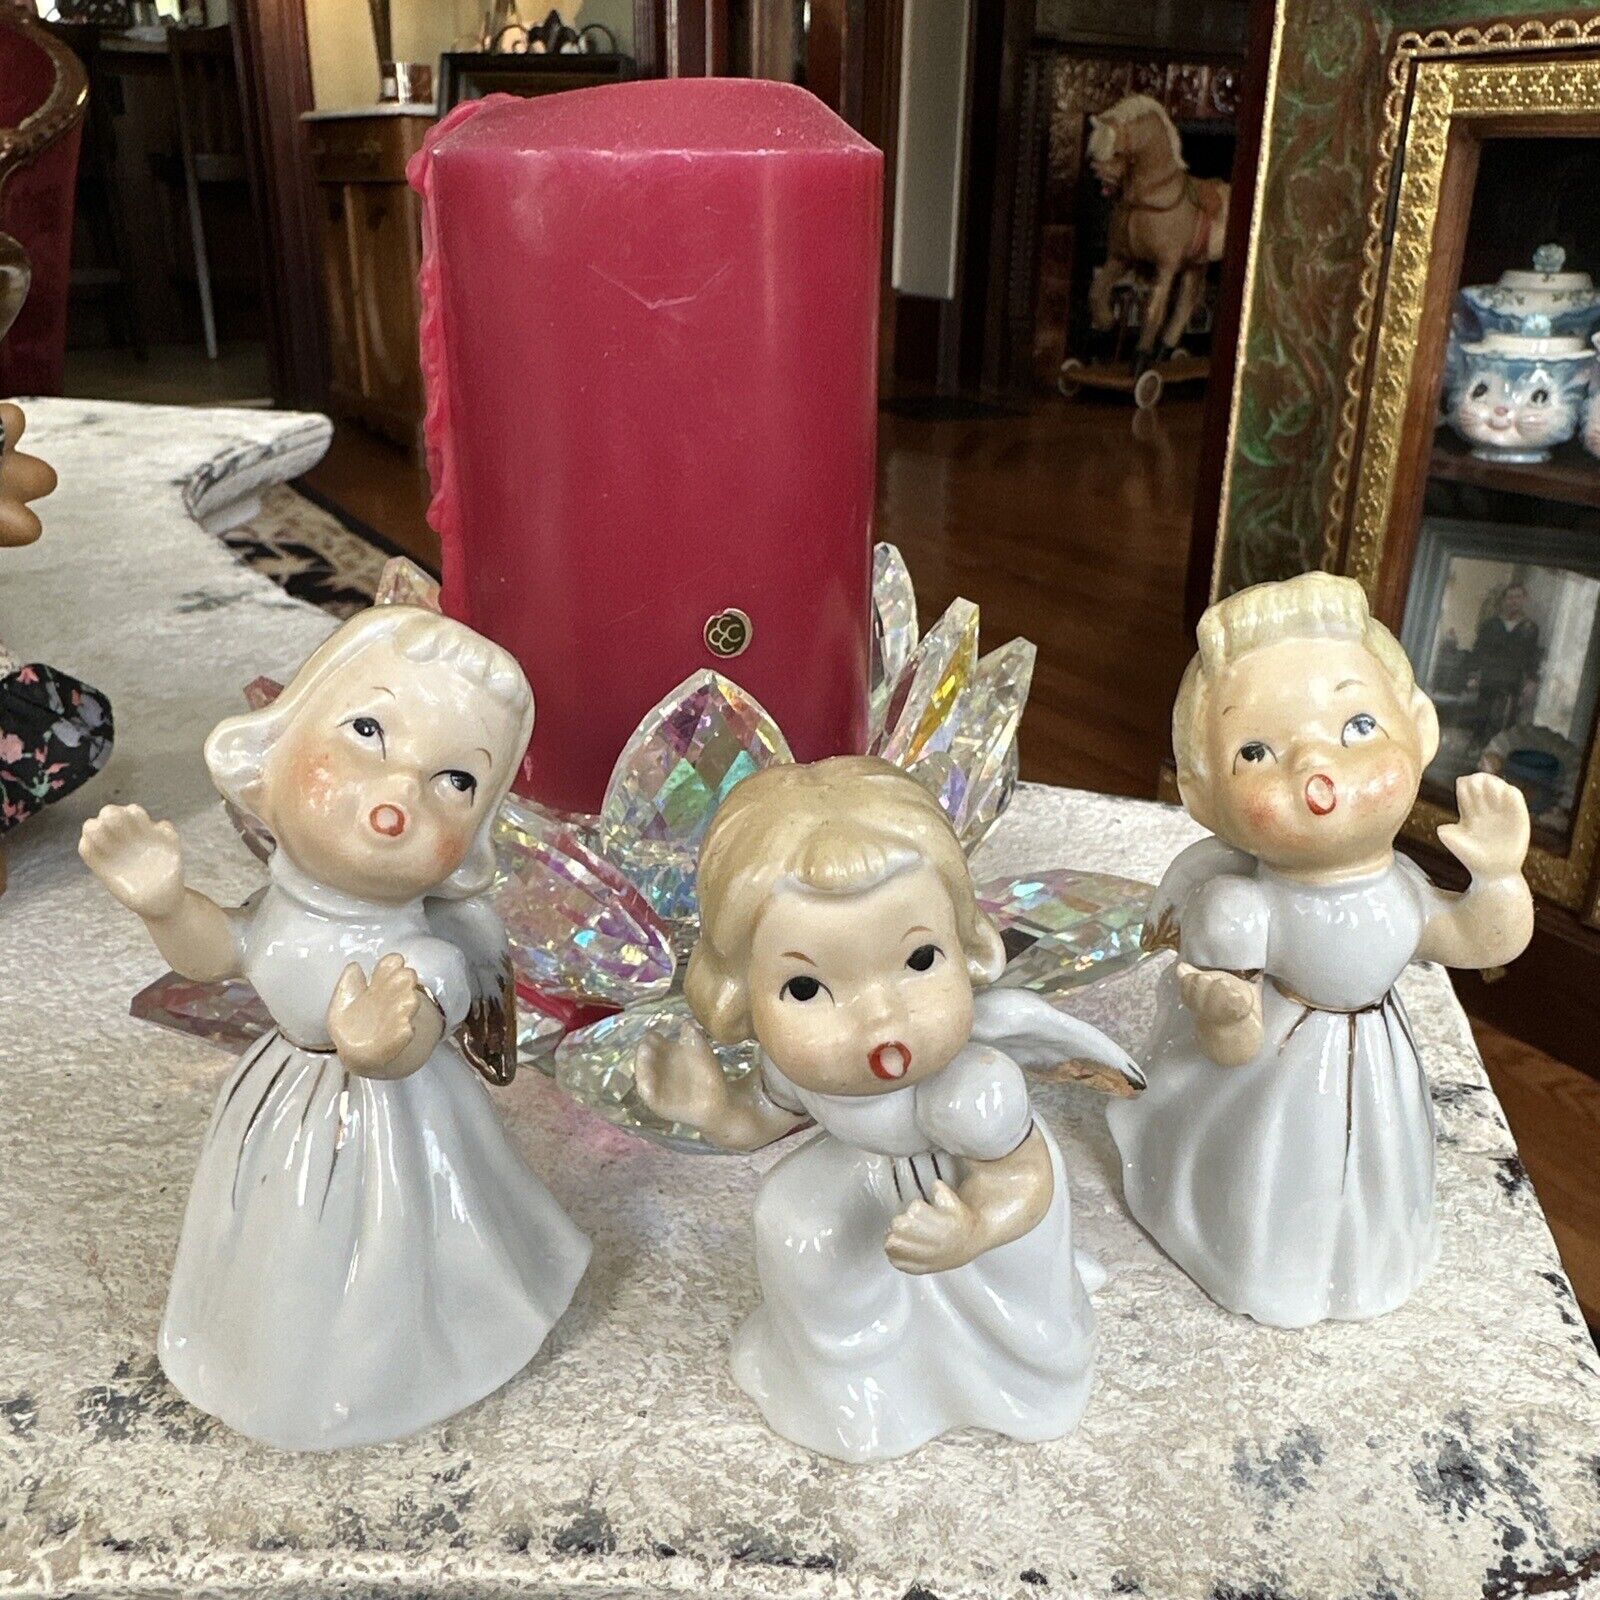 3 Vintage Open Mouth Angel Figurines White W/ Gold Trim Singing Japan Christmas